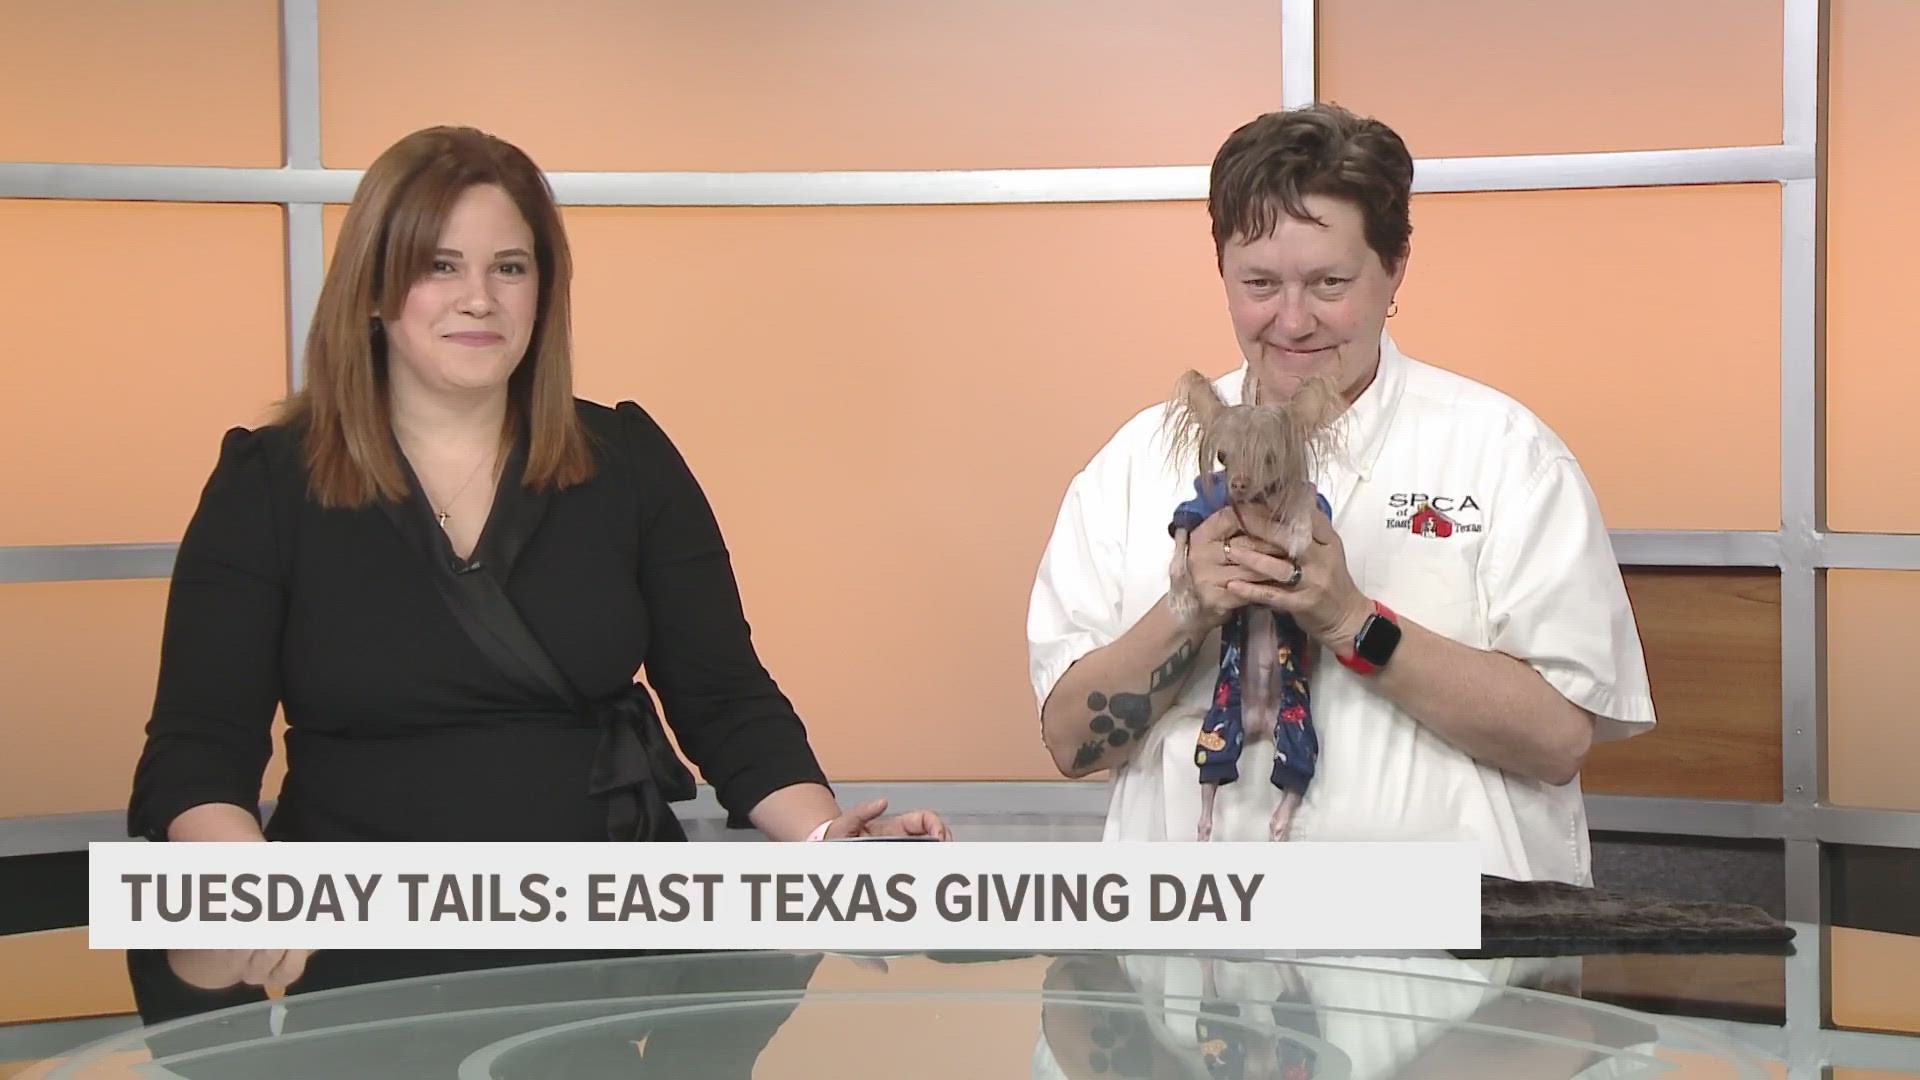 The SPCA of East Texas has nearly 200 dogs and cats in their care at any given time, and they continue to receive dozens of calls daily to rescue and rehome pets.